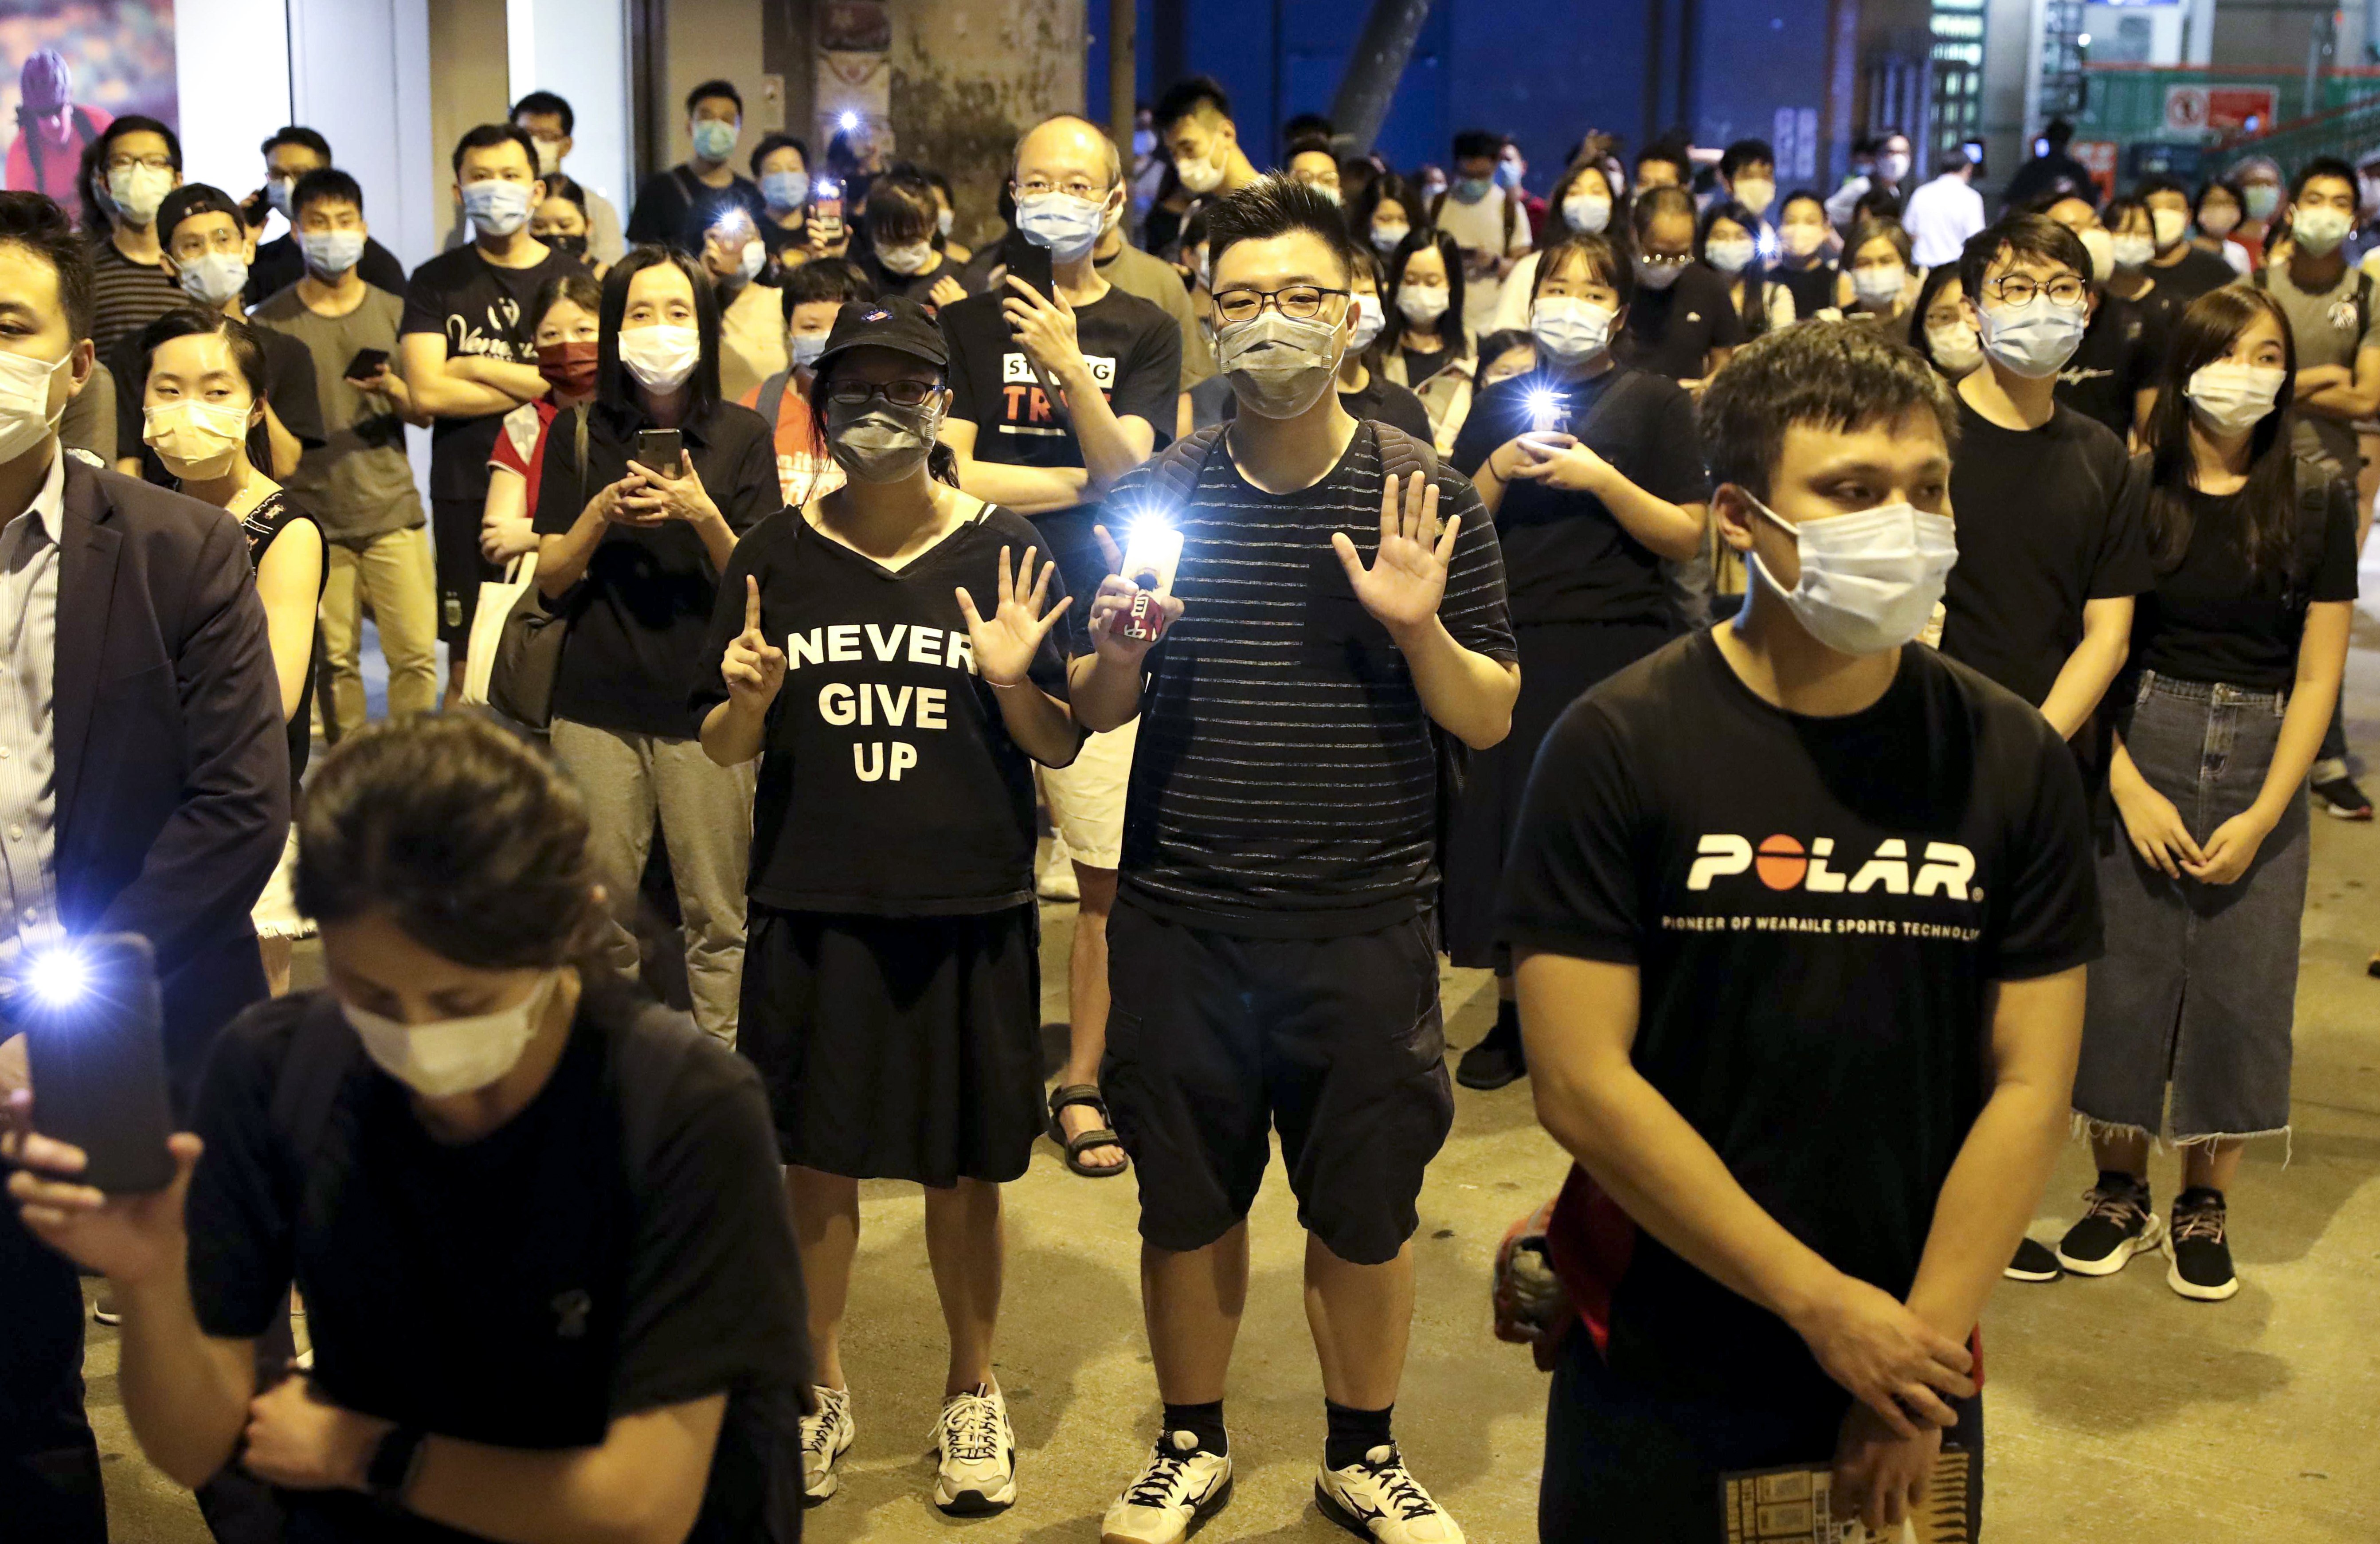 Popular protests slogans, especially ones that call for Hong Kong's independence, are now illegal under the national security law. Photo: SCMP/Edmond So